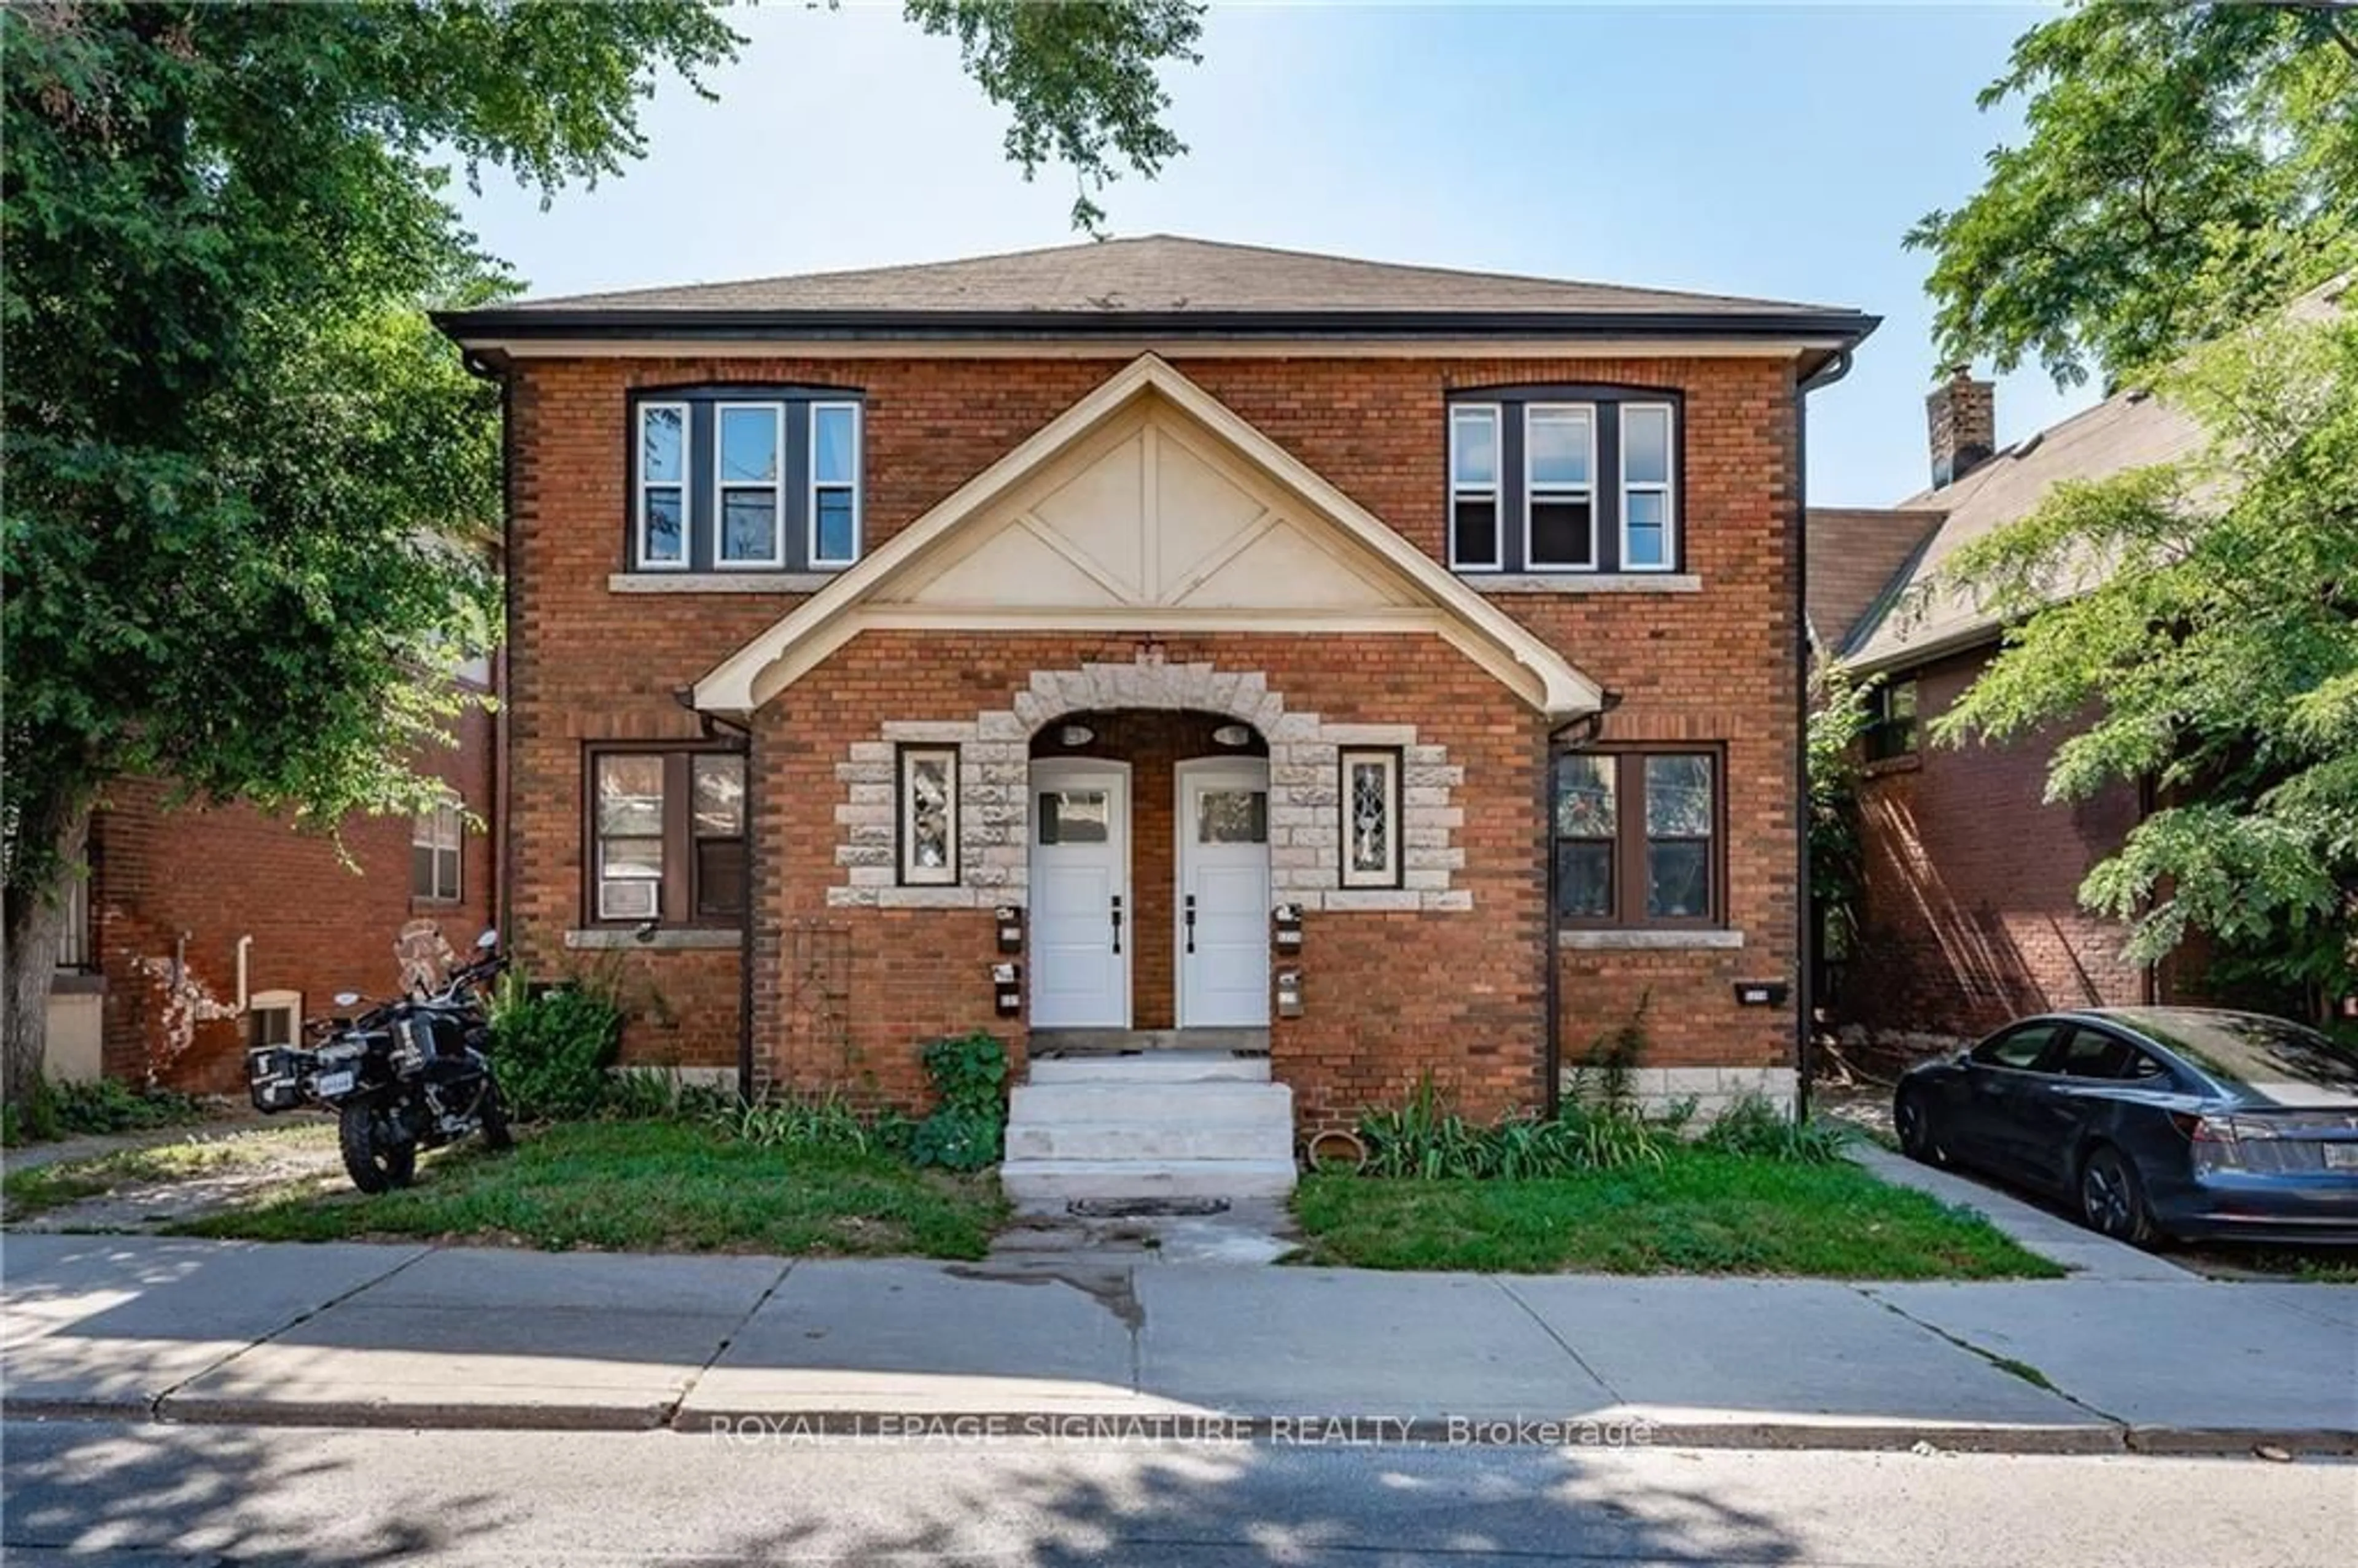 Home with brick exterior material for 527 Kingston Rd, Toronto Ontario M4L 1V5